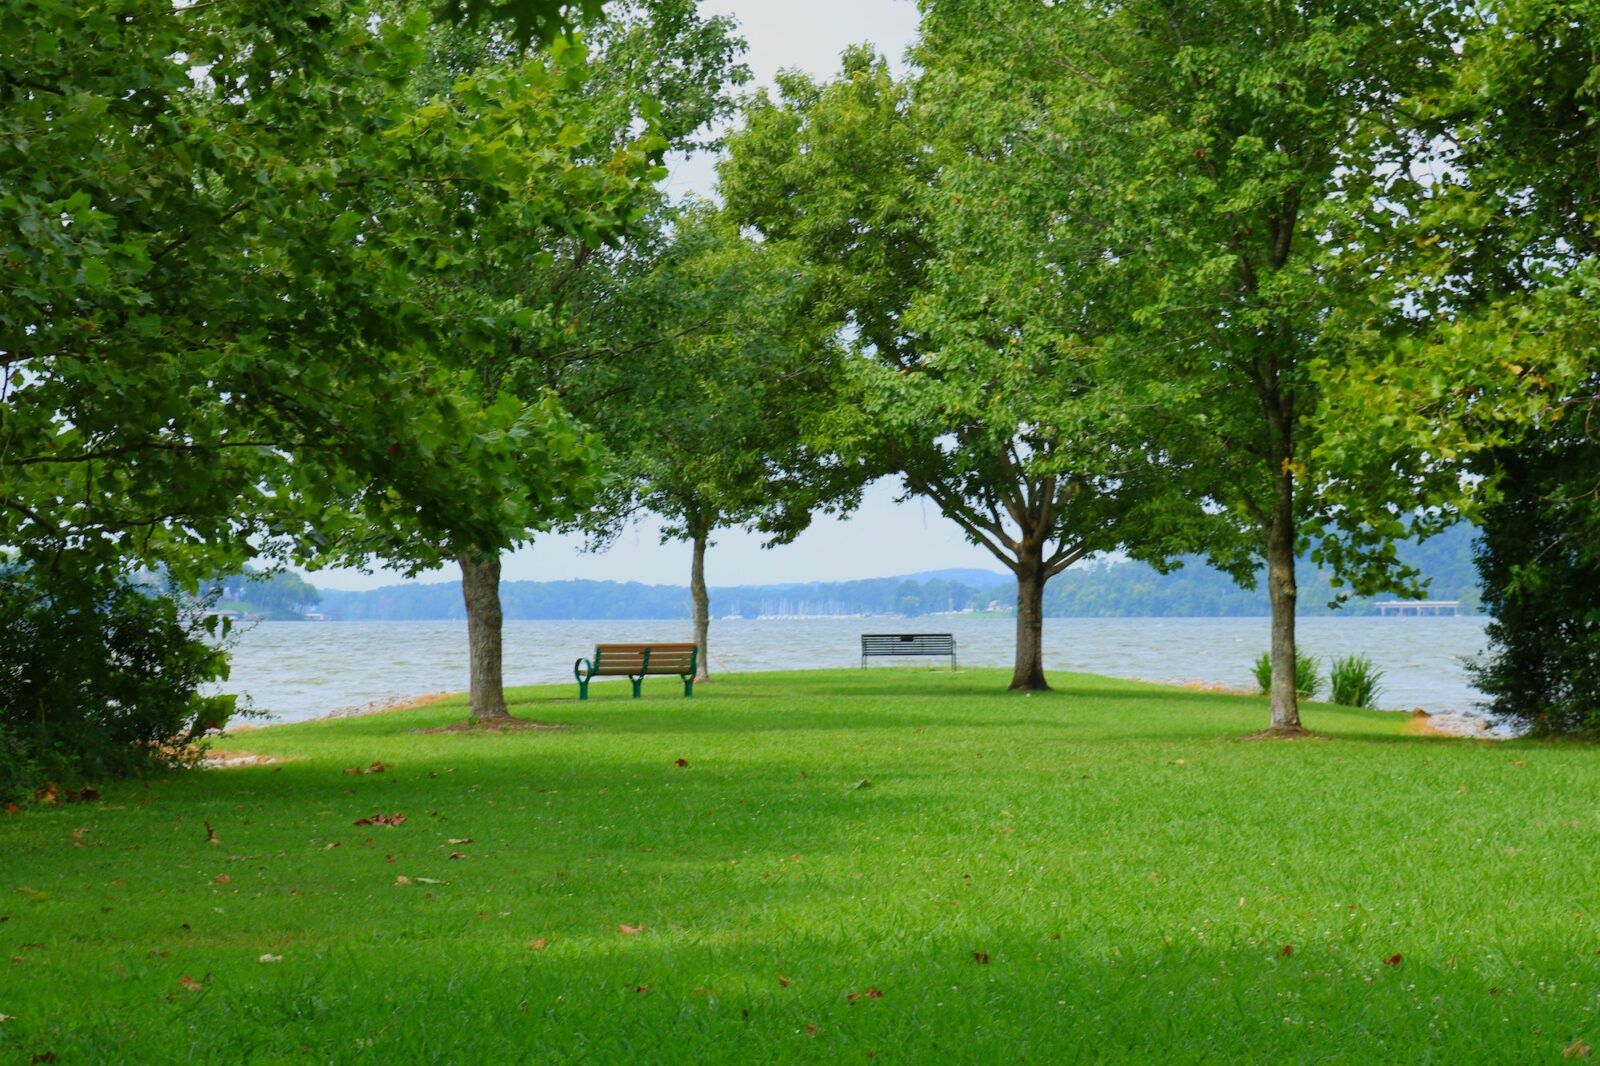 Scenic view of two benches under trees near an open body of water near Knoxville in Tennessee